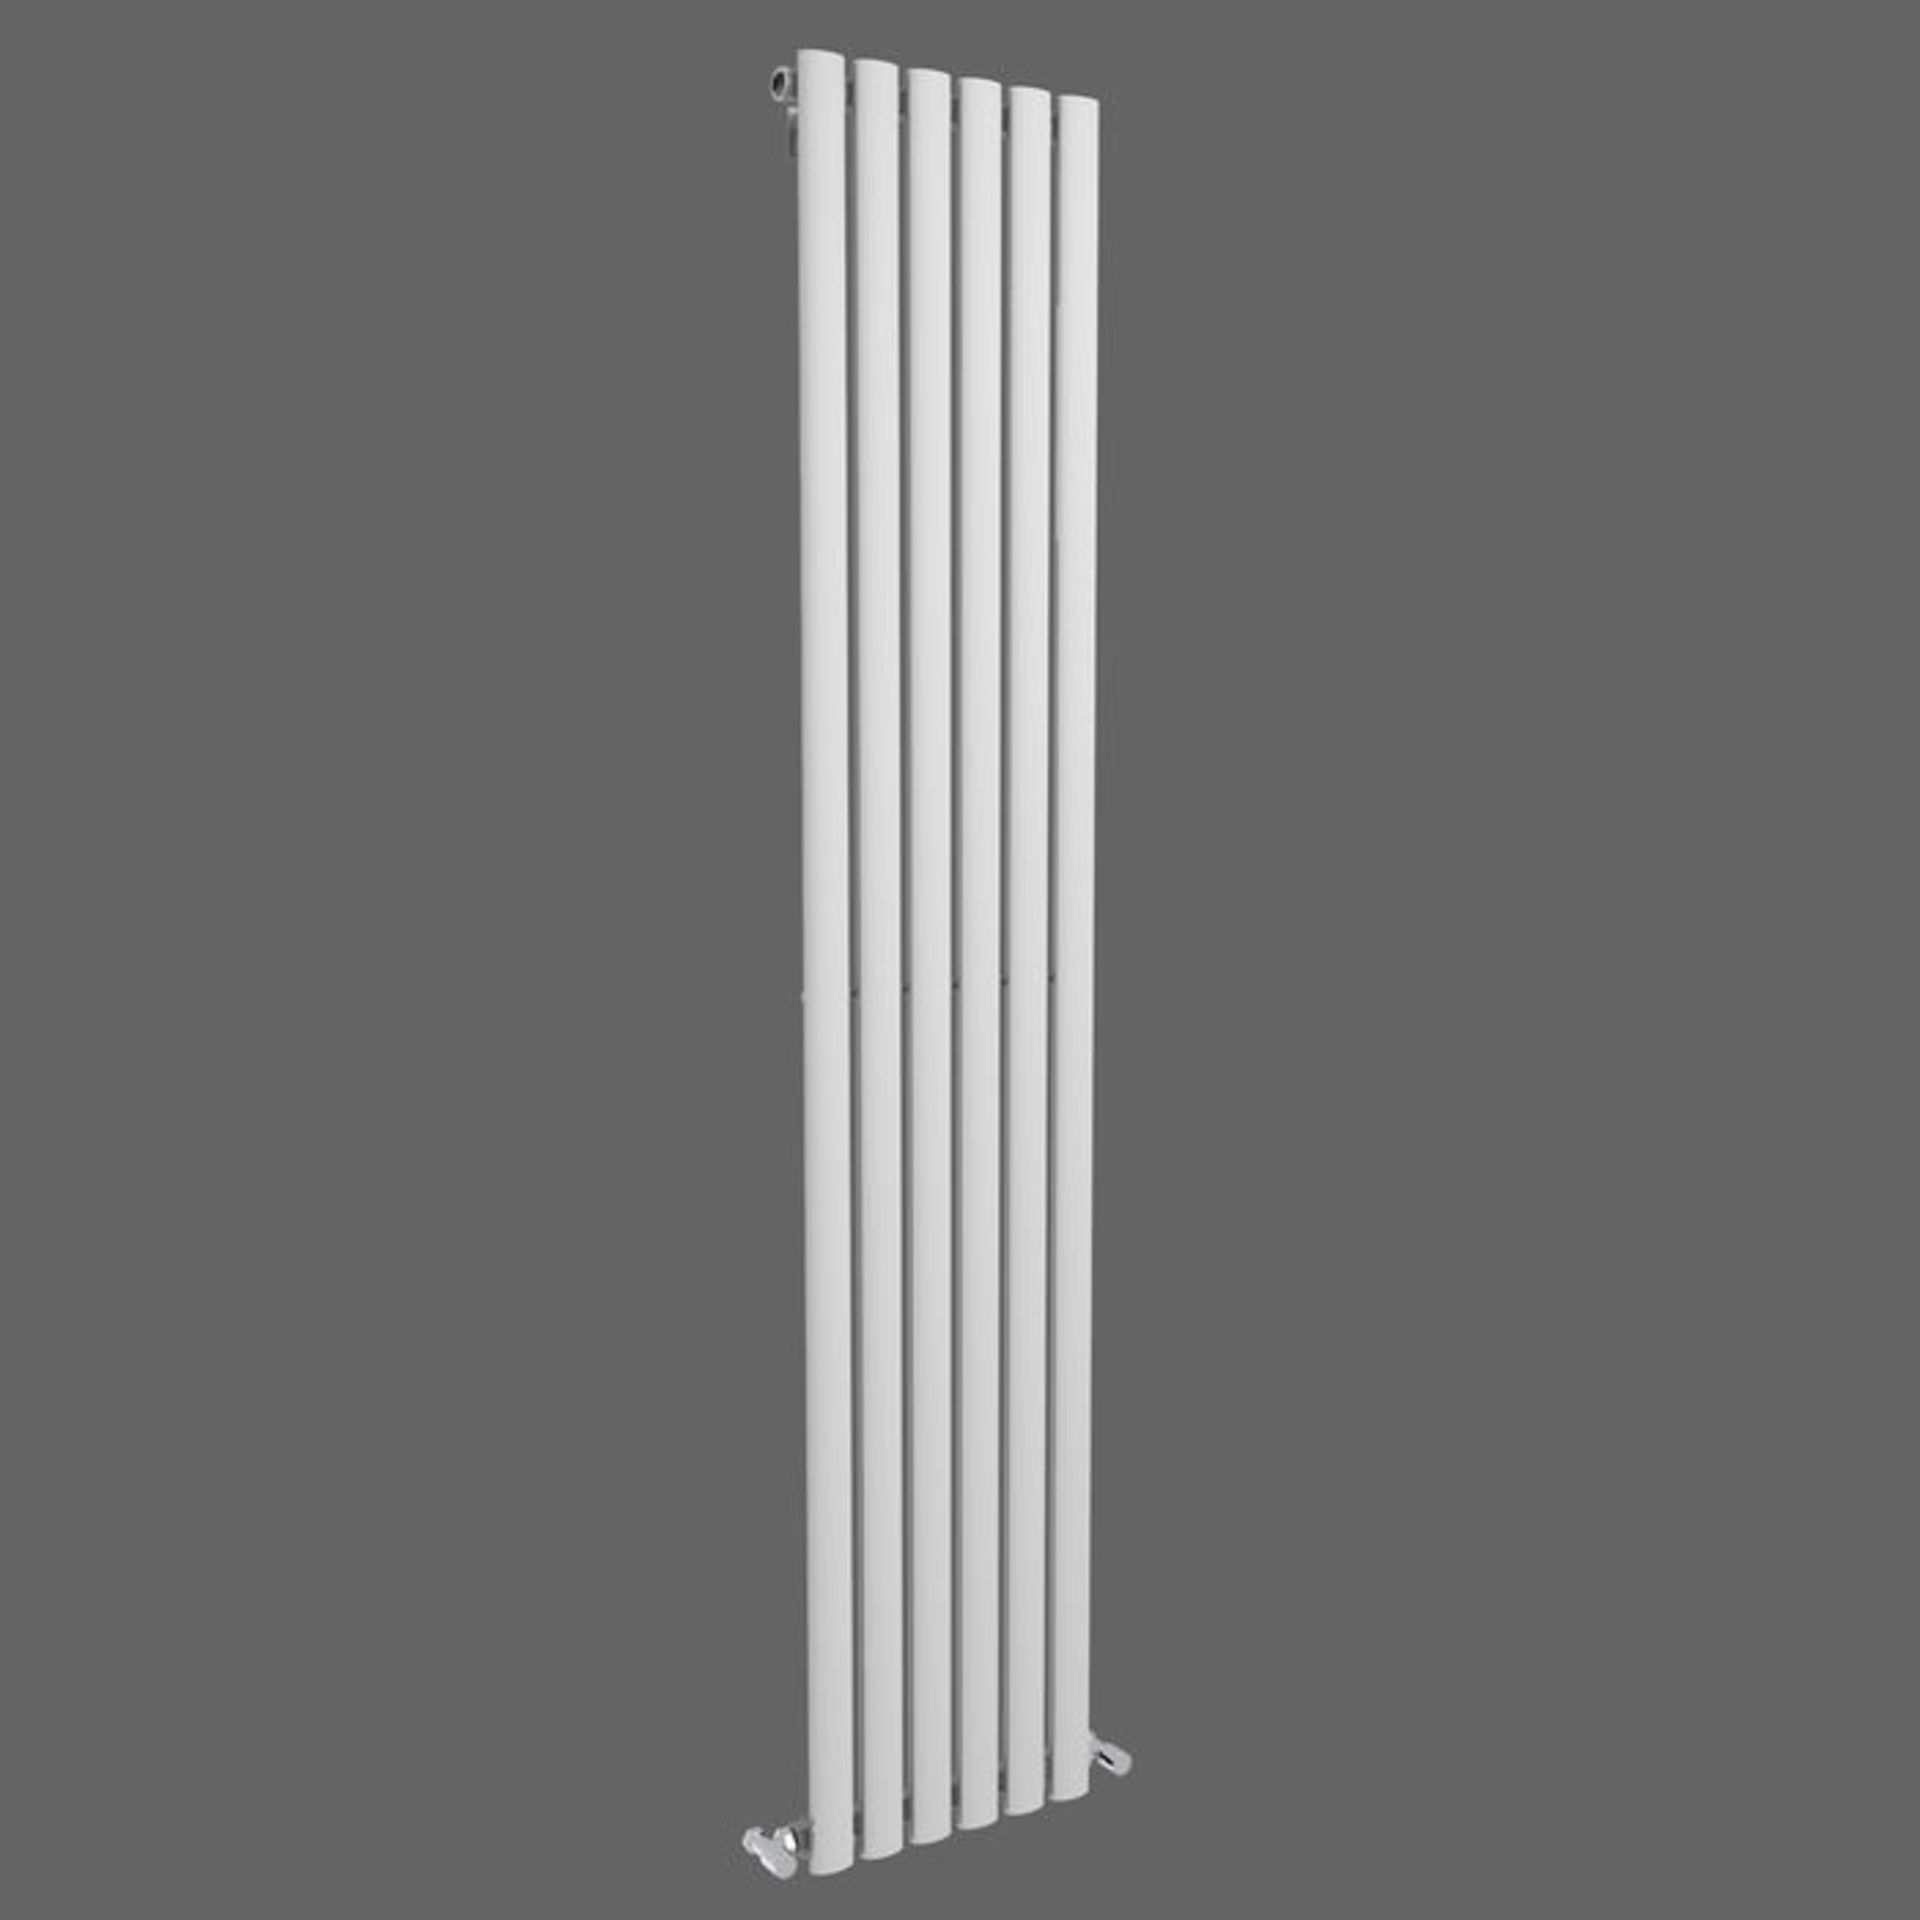 New & Boxed 1800x360mm Gloss White Single Oval Tube Vertical Radiator. RRP £256.99.Sah6/1800S... - Image 3 of 3